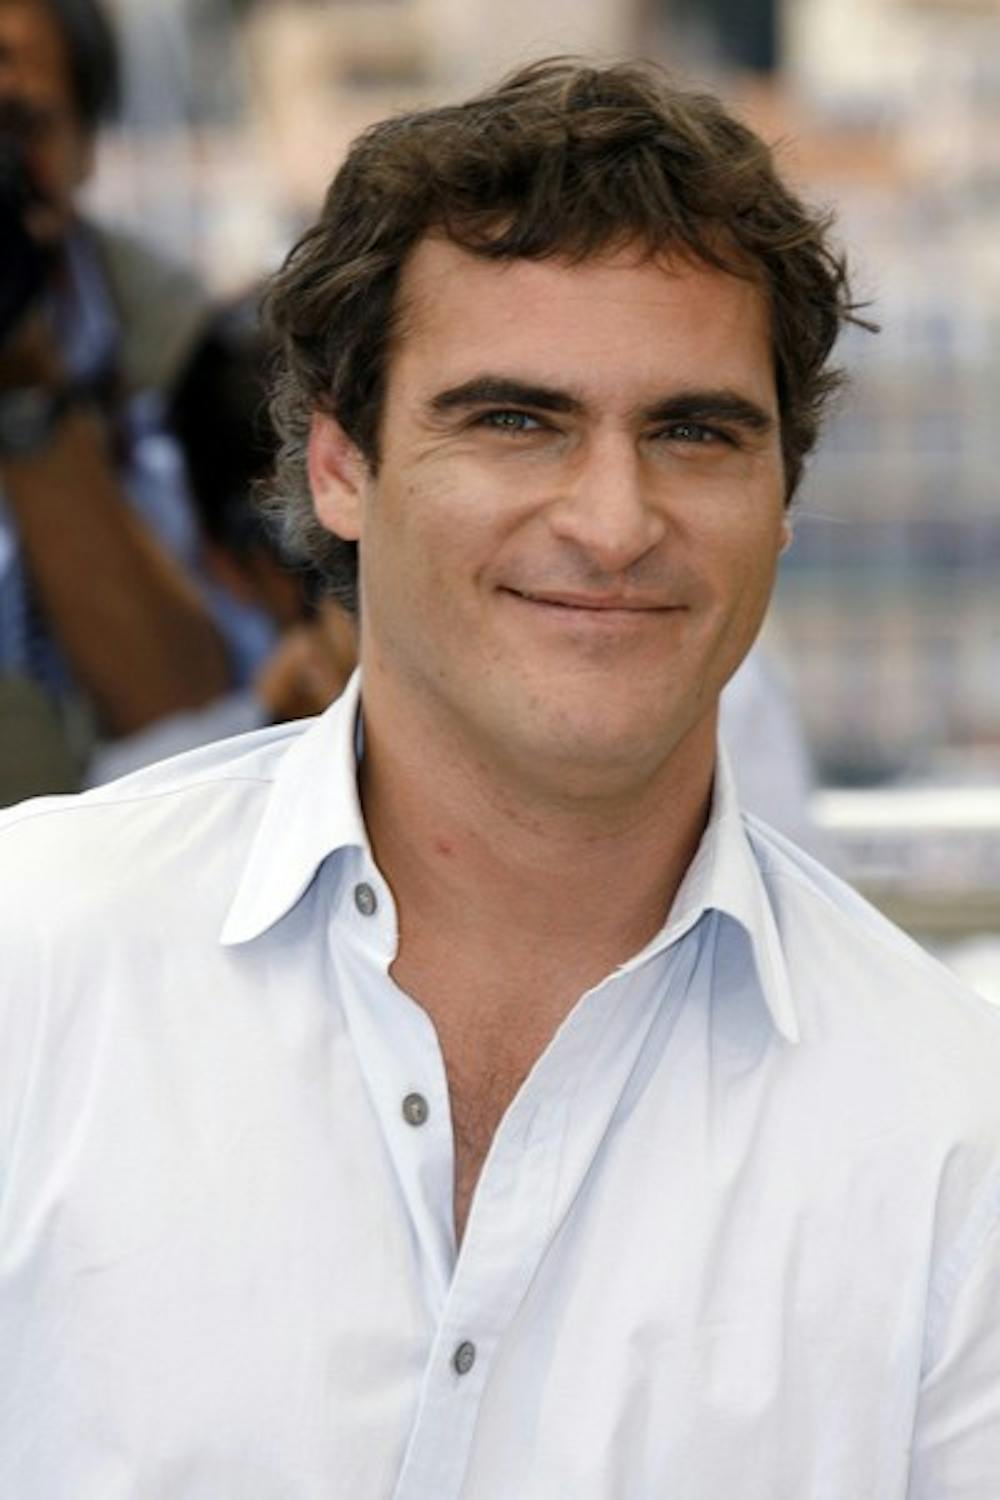 Joaquin Phoenix poses during a photocall for the film "We Own the Night" during the 60th International Cannes Film Festival at the Palais des Festivals in Cannes, France, Friday, May 25, 2007. (Calo-MF/Abaca Press/MCT) 